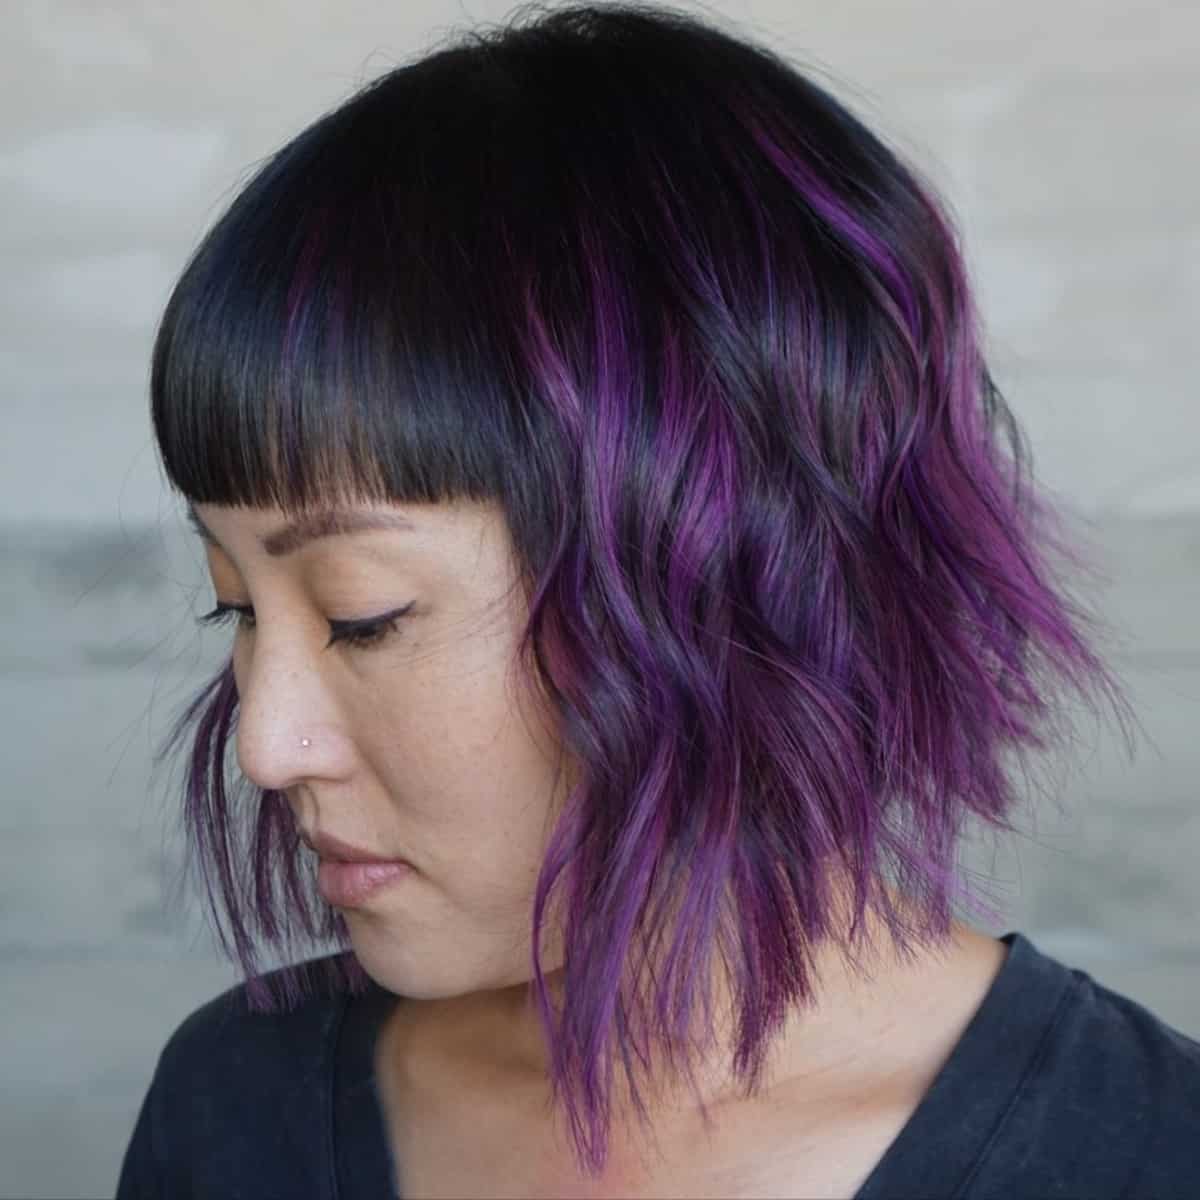 Textured angled bob with bangs and purple highlights